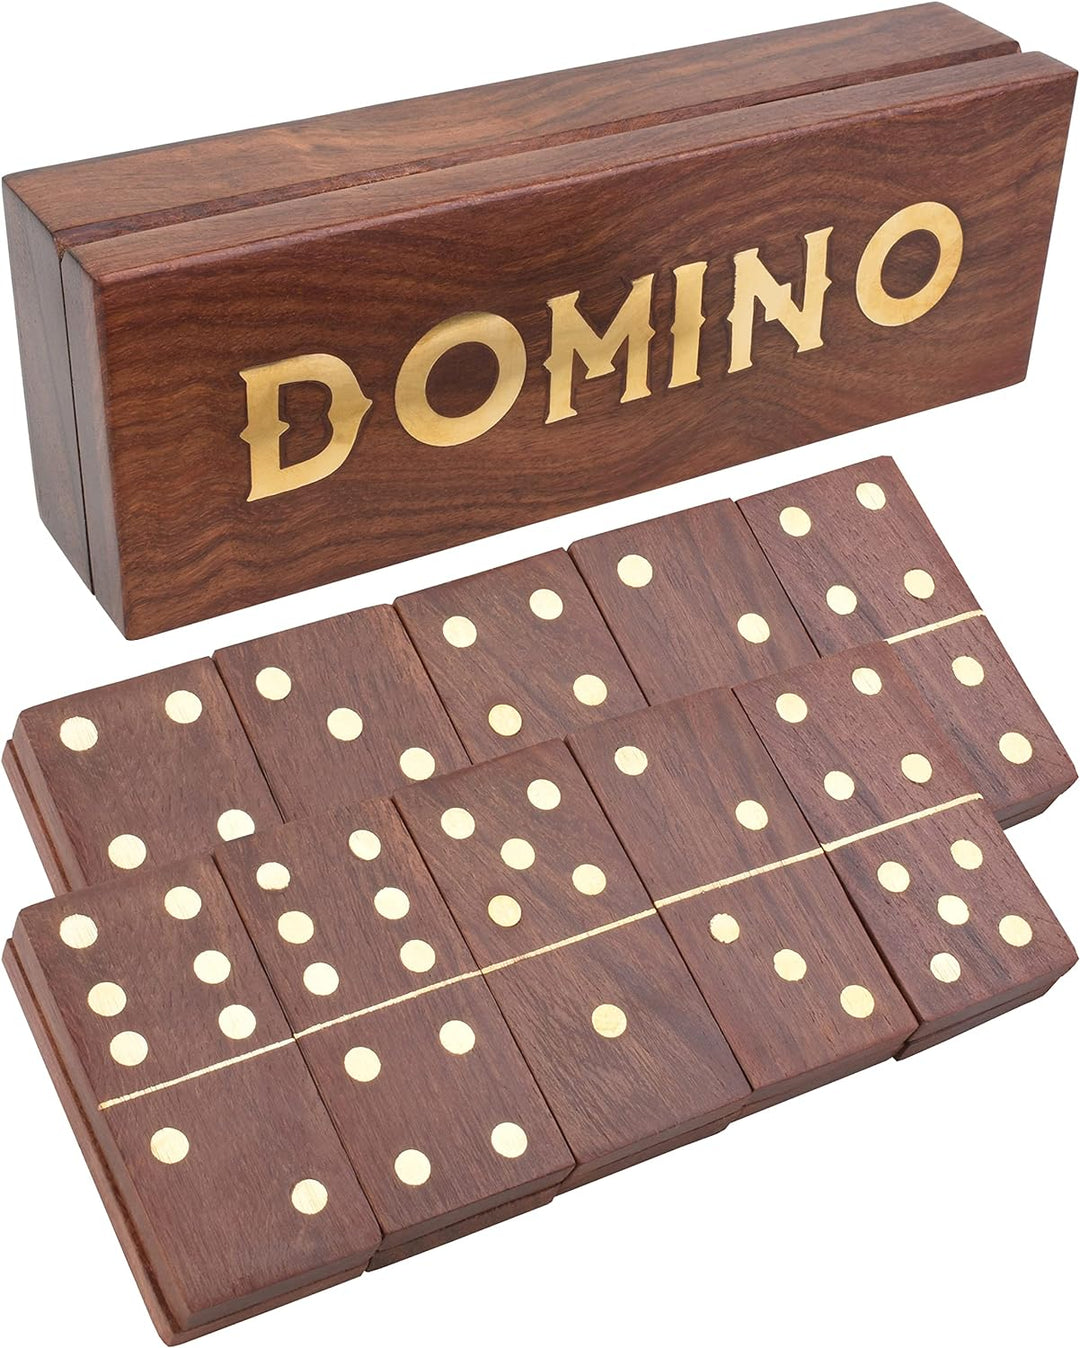 Double Six Standard Dominos Set 28 Tiles with Wooden Case